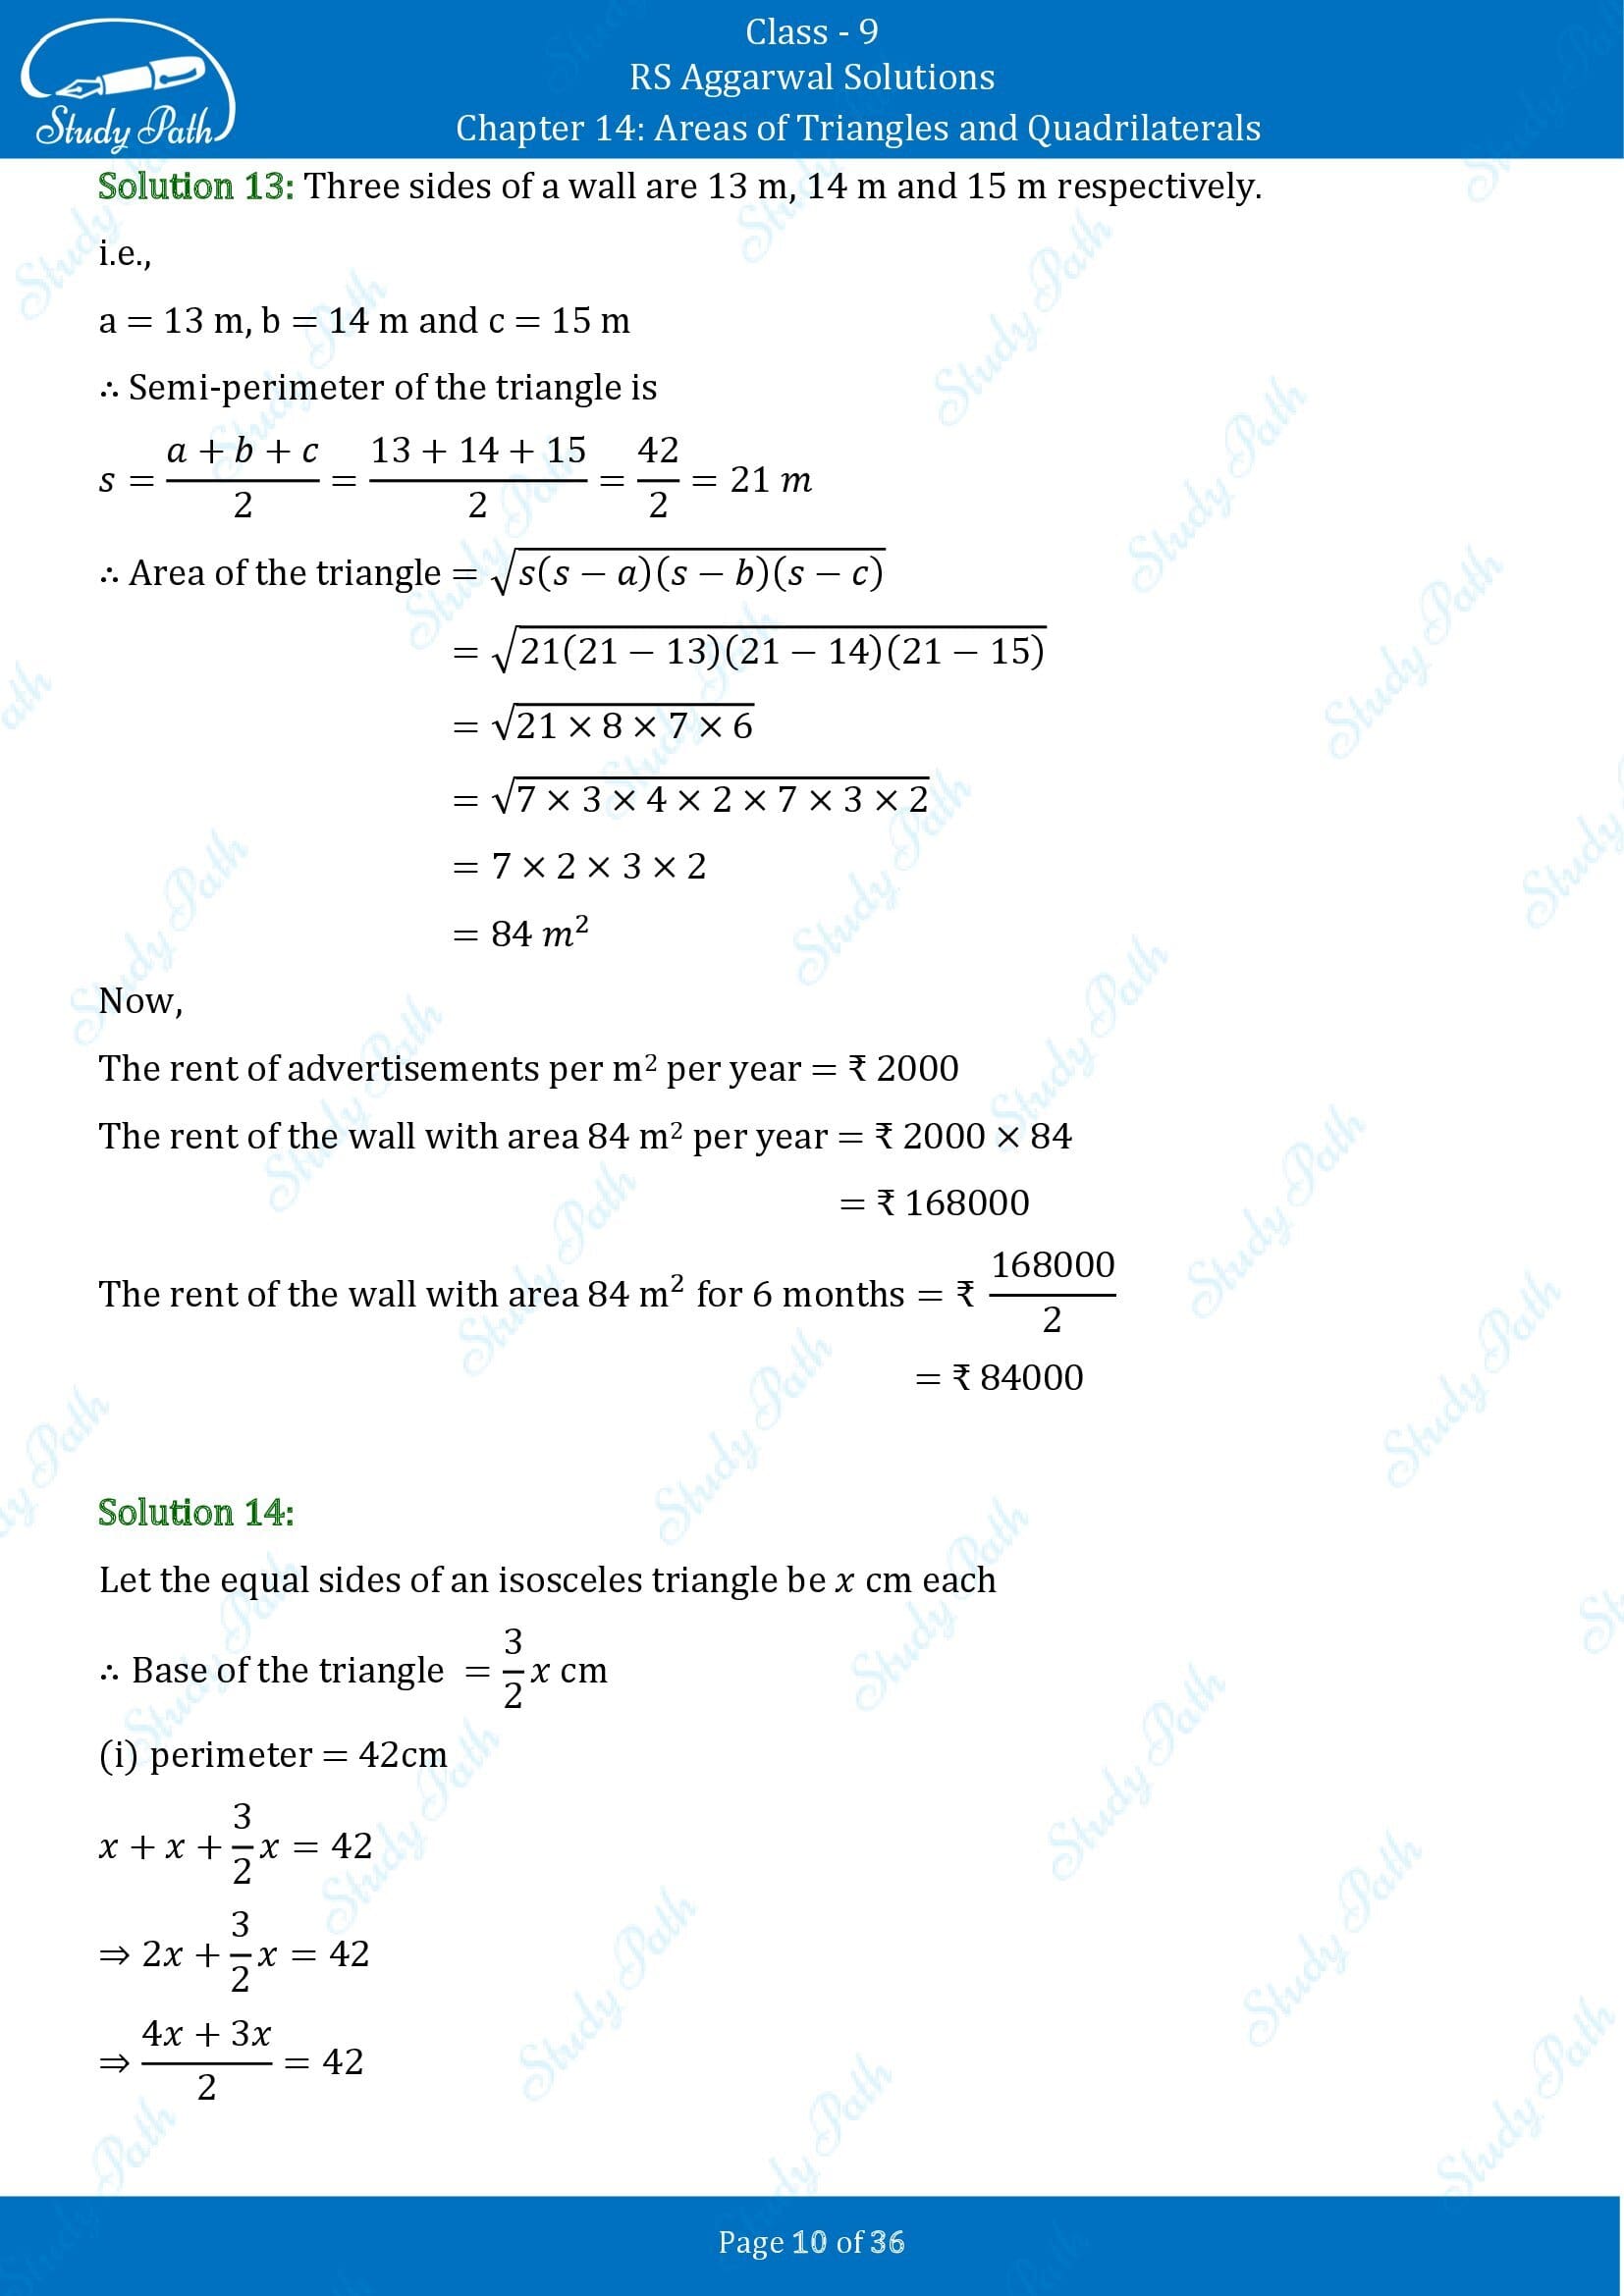 RS Aggarwal Solutions Class 9 Chapter 14 Areas of Triangles and Quadrilaterals Exercise 14 00010